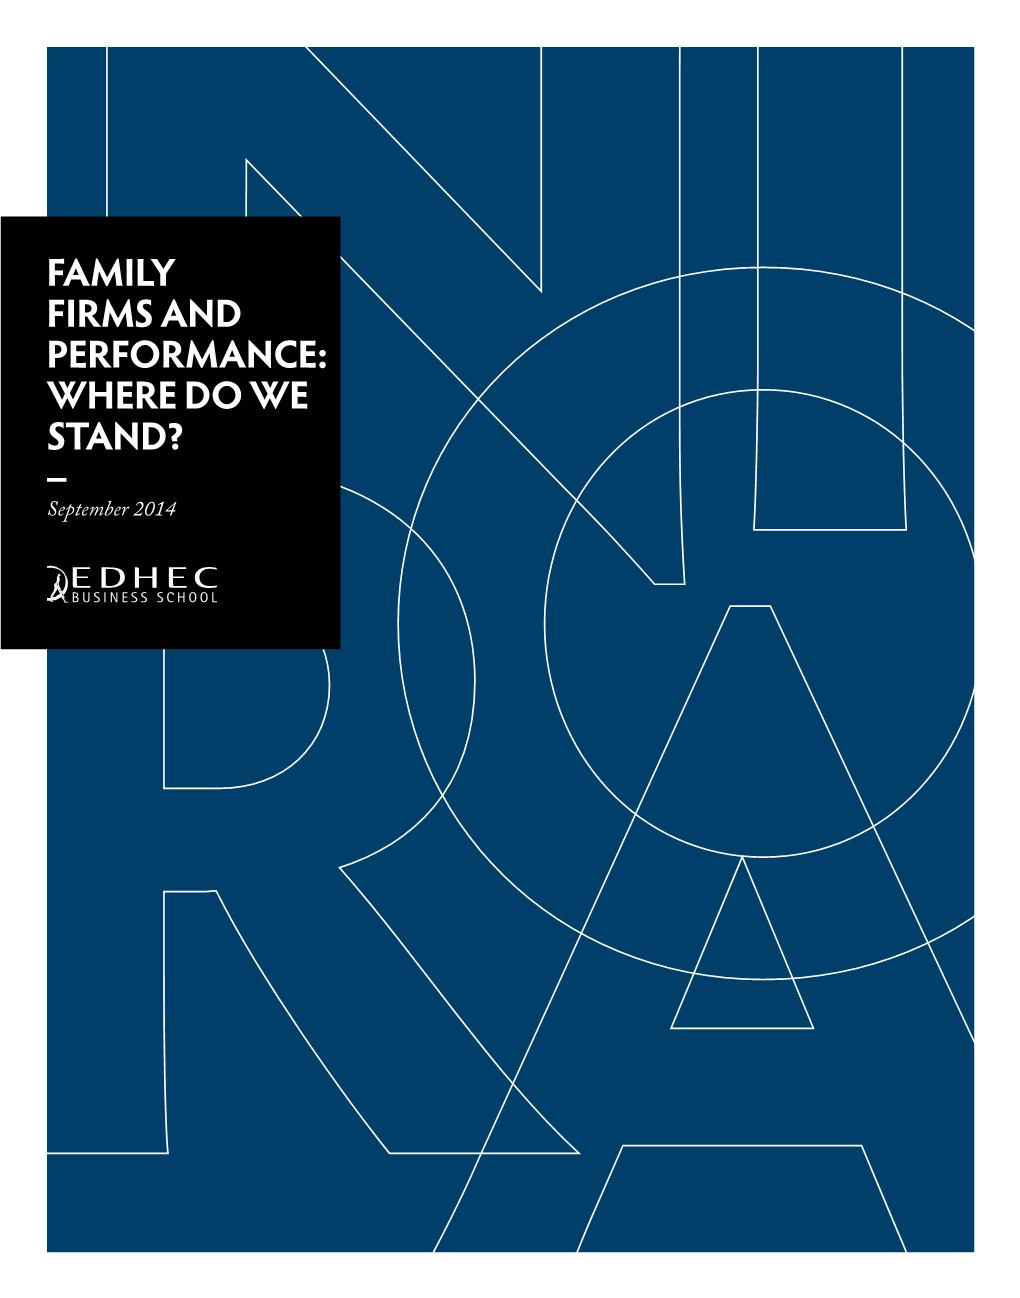 Family Firms and Performance: Where Do We Stand?